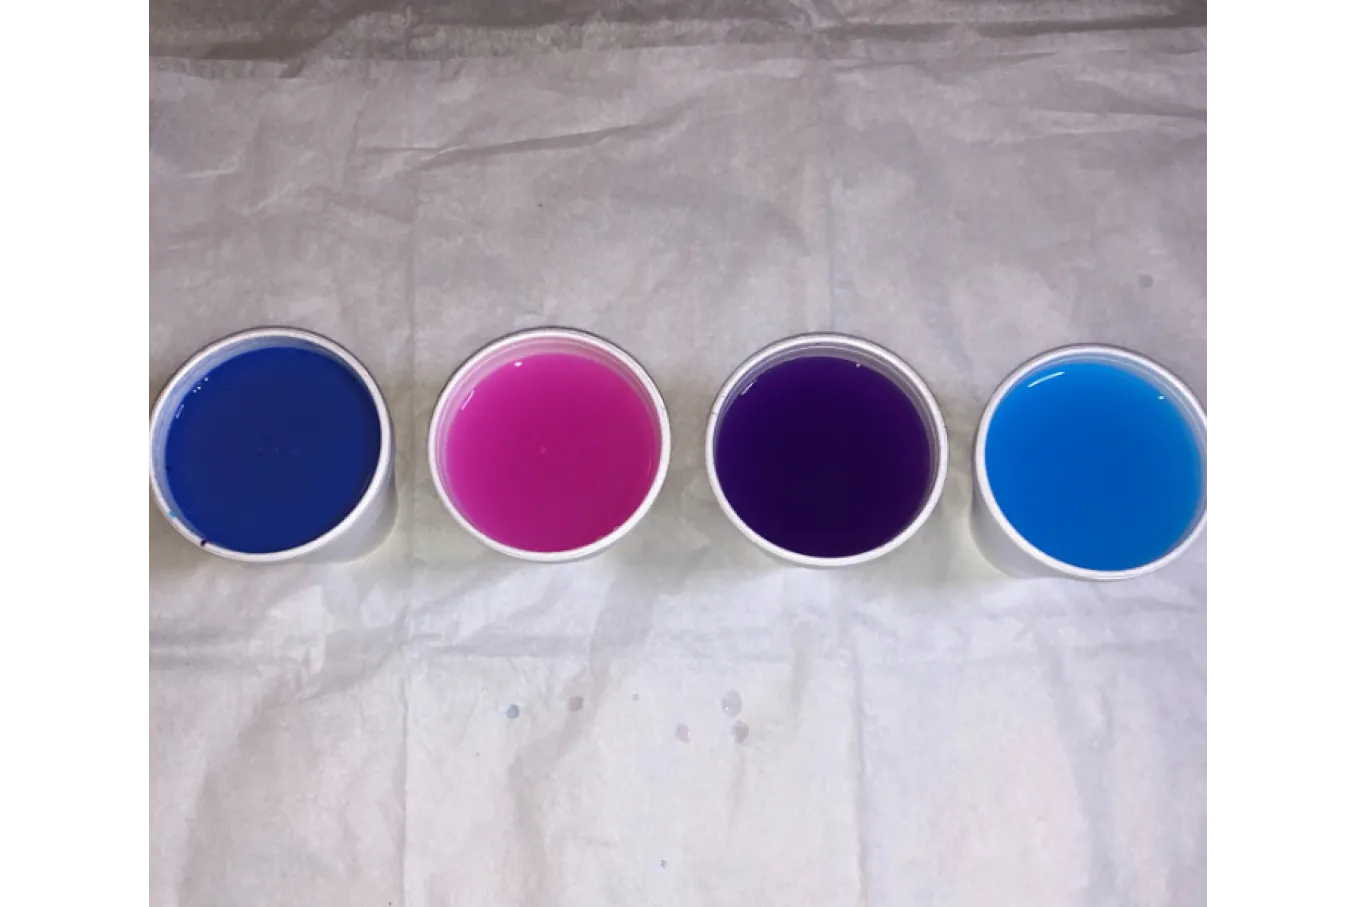 Four cups of paint (periwinkle, pink, purple, and blue)